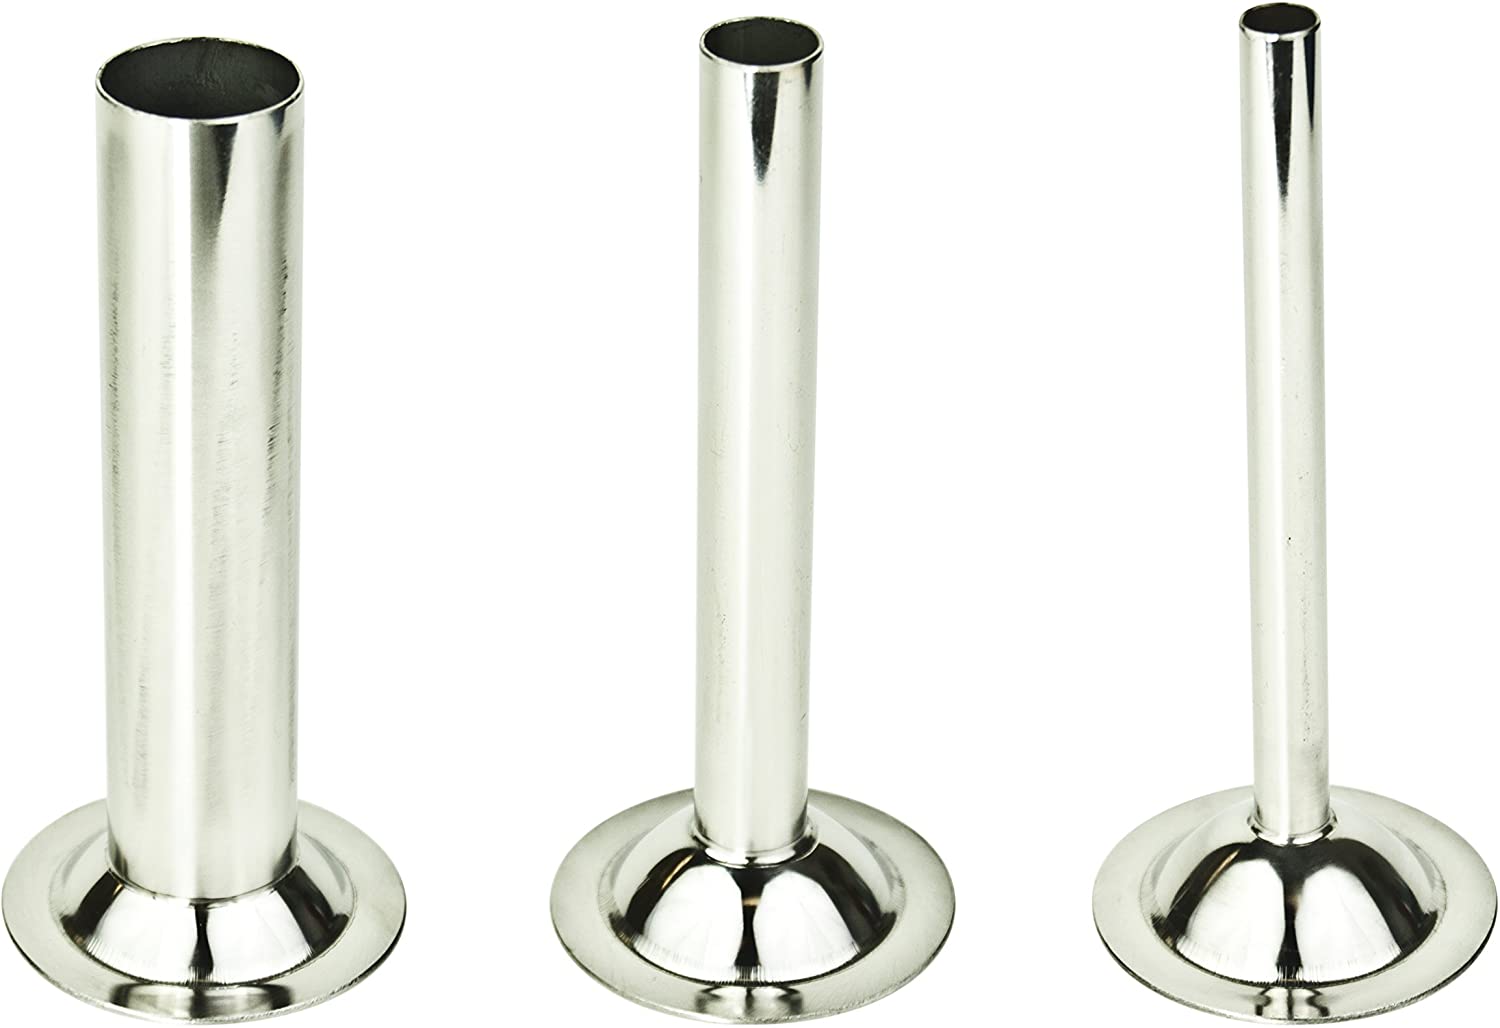 WolfCut Sausage Fillers Set of 3 Inox Compatible with Mincer Size 22